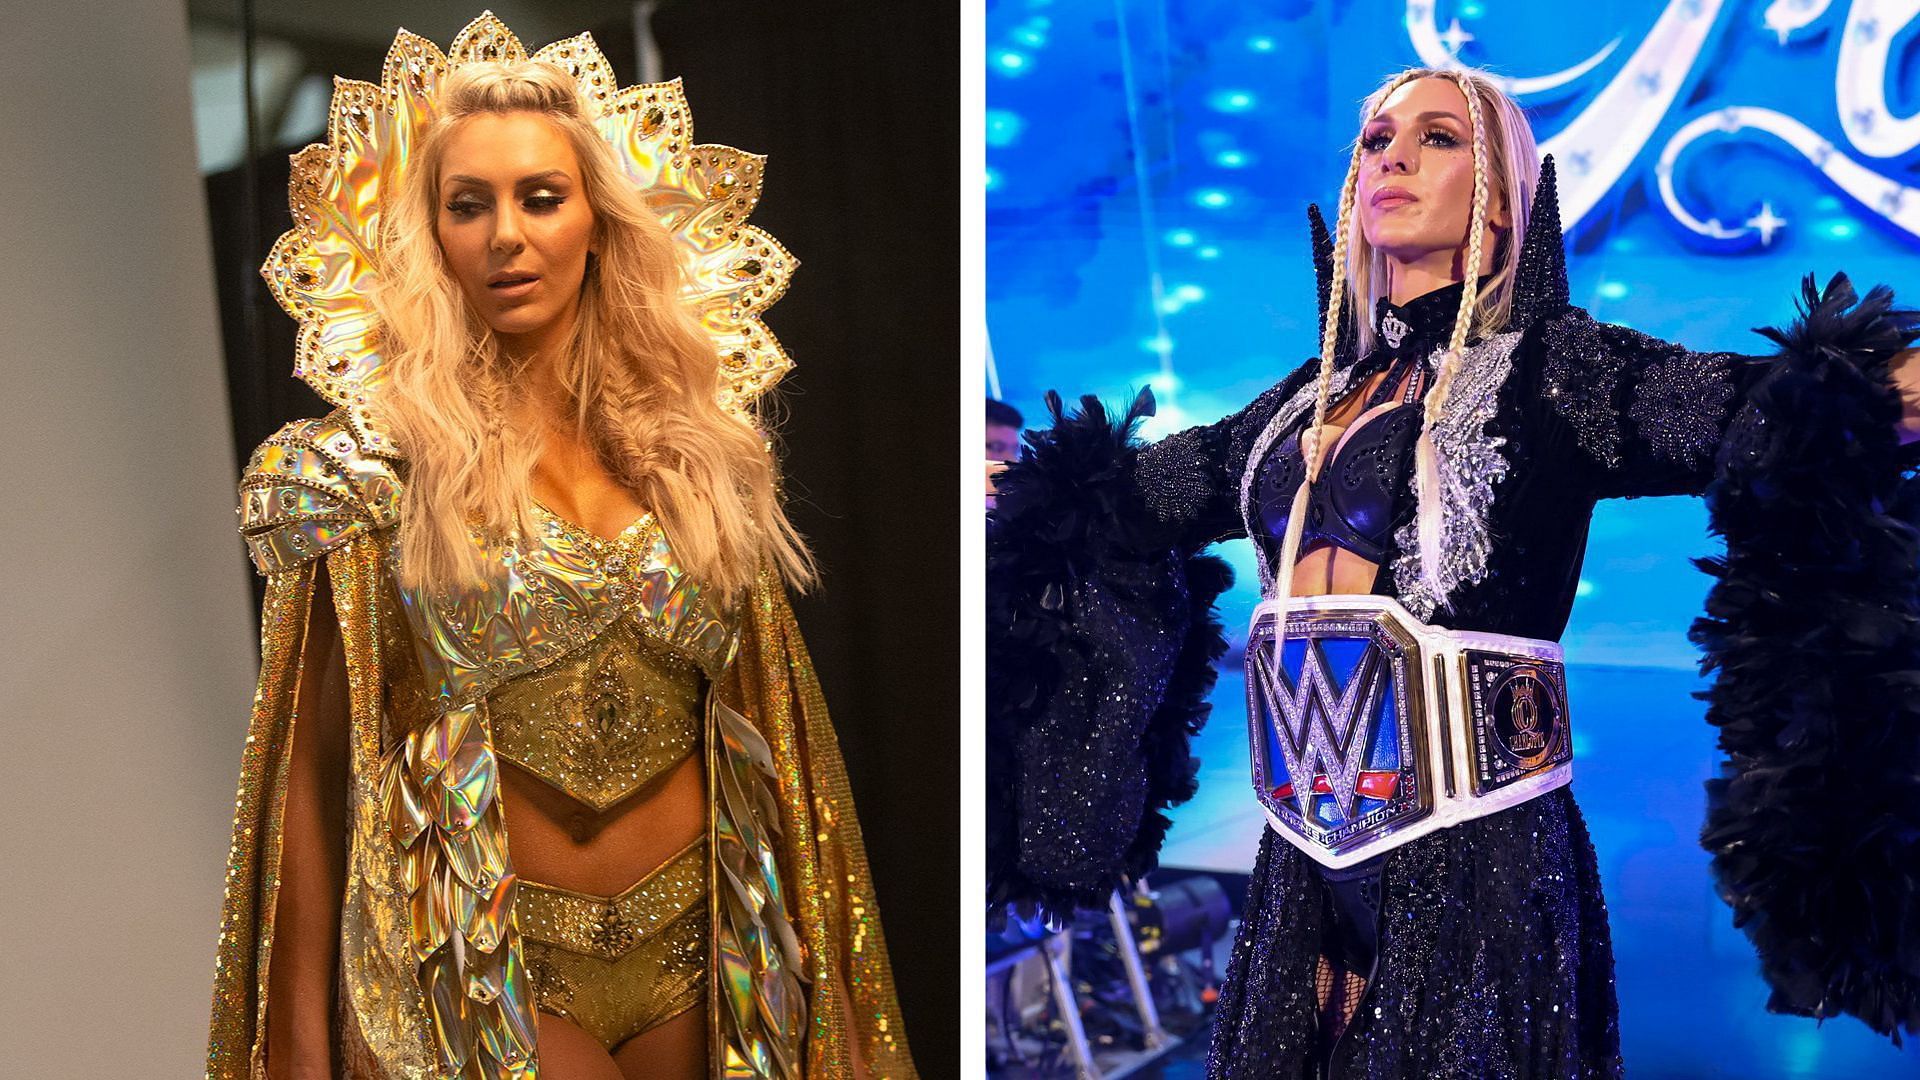 Charlotte Flair could have a big 2023 in WWE